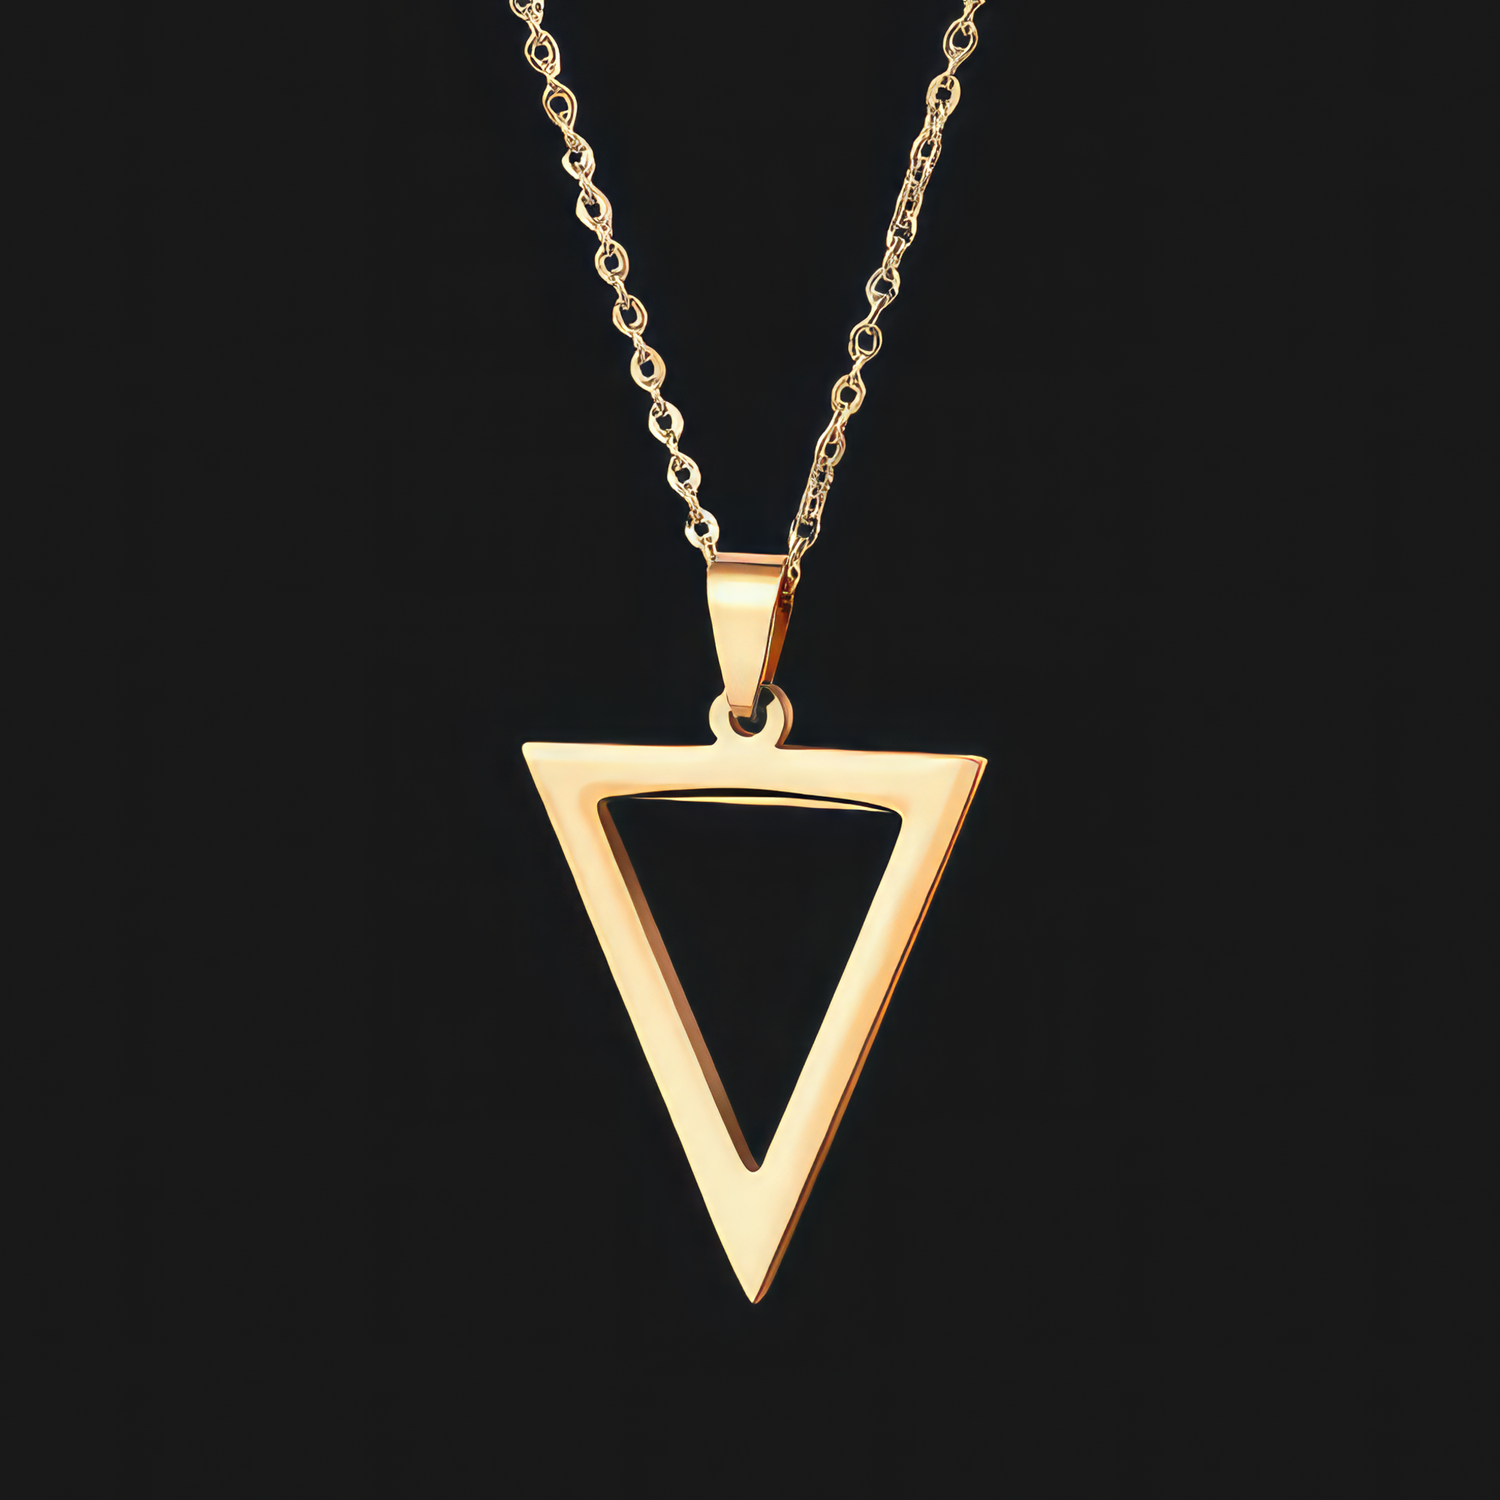 Gold Steel Triangle Pendant Necklace